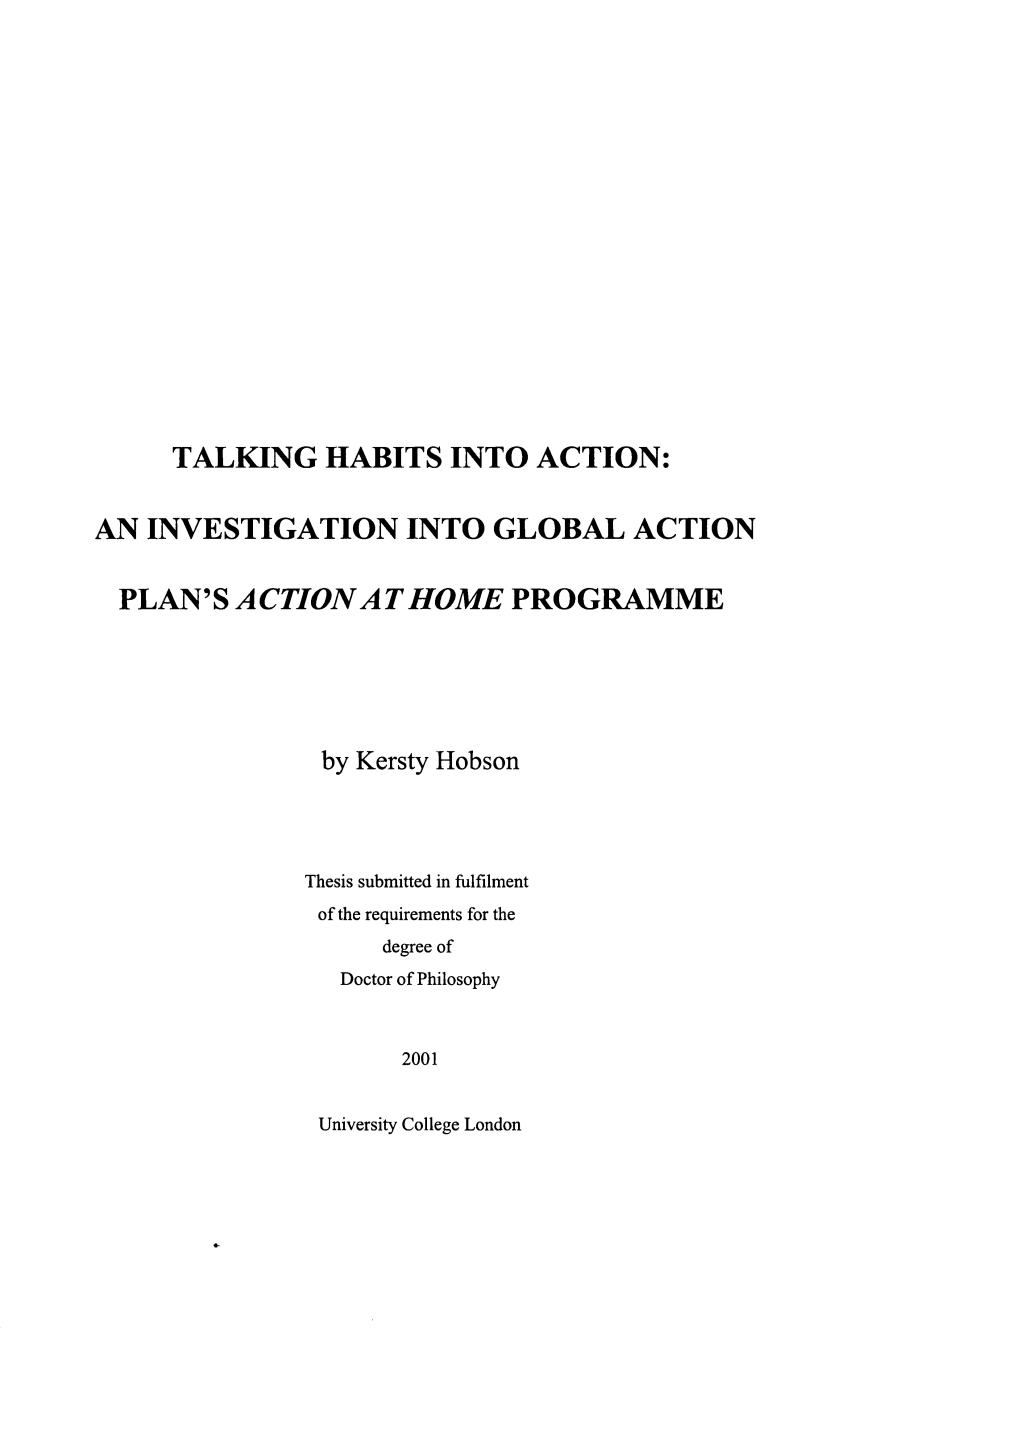 Talking Habits Into Action: an Investigation Into Global Action